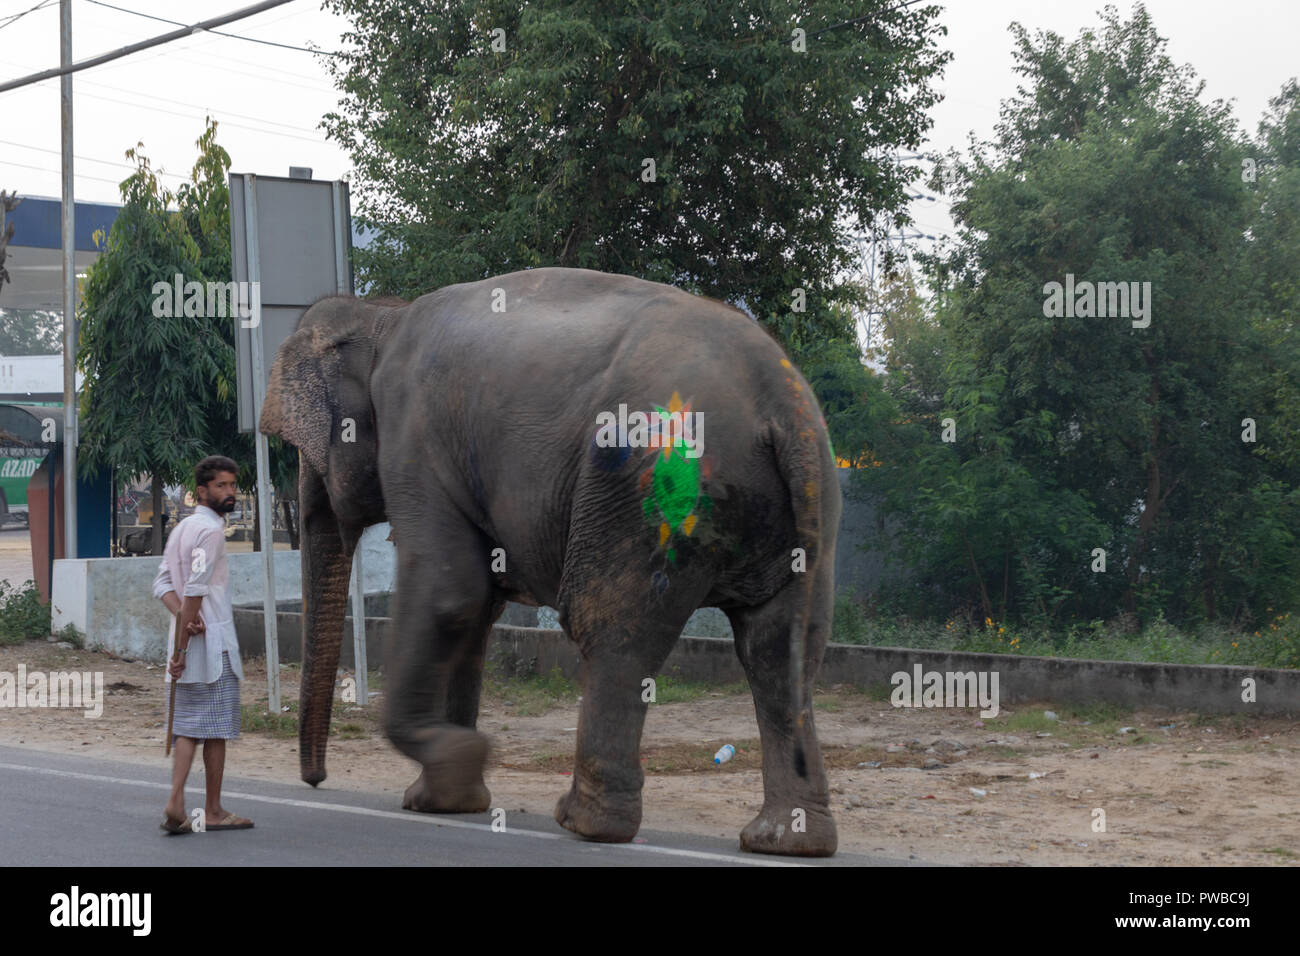 Nakodar, Panjab, India. 15 October 2018. Morning  street scenes in north Panjab market town of Nakodar. Morning walk for Indian elephant at street scrossing. There are reported to be about 20 working elephants in Panjab many based in Ludhiana but then moved to rural areas for participation in marriage and religious ceremonies as well as collecting alms. Credit: WansfordPhoto/Alamy Live News Stock Photo